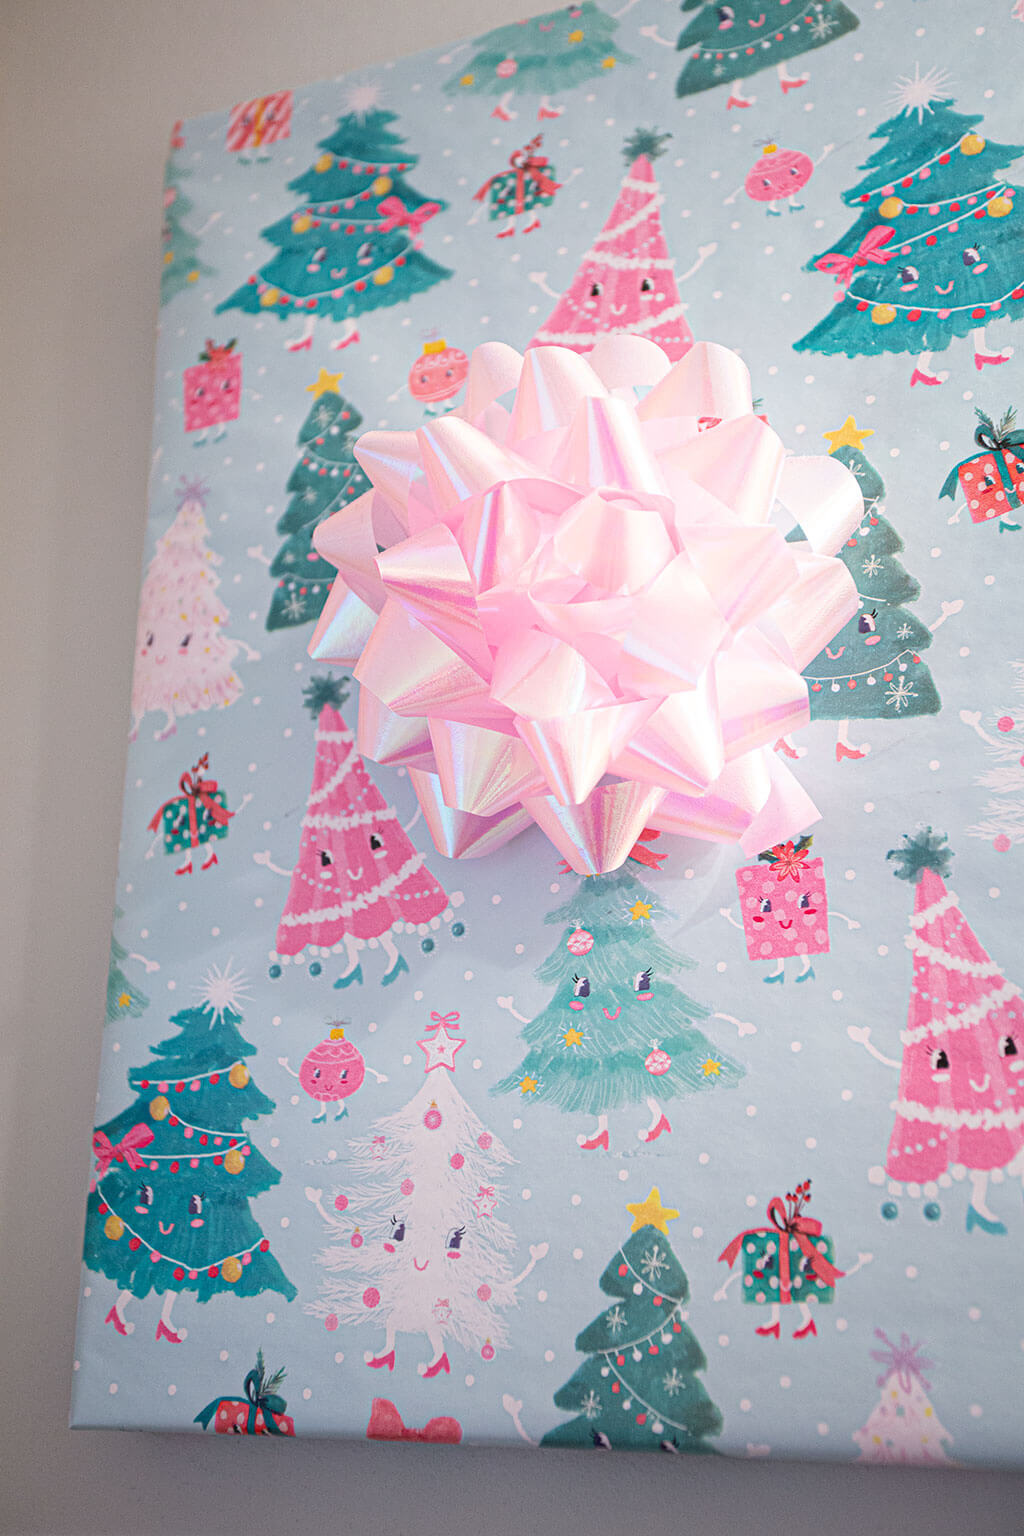 drive-swim-fly-pink-christmas-decor-holiday-dancing-trees-warpping-paper